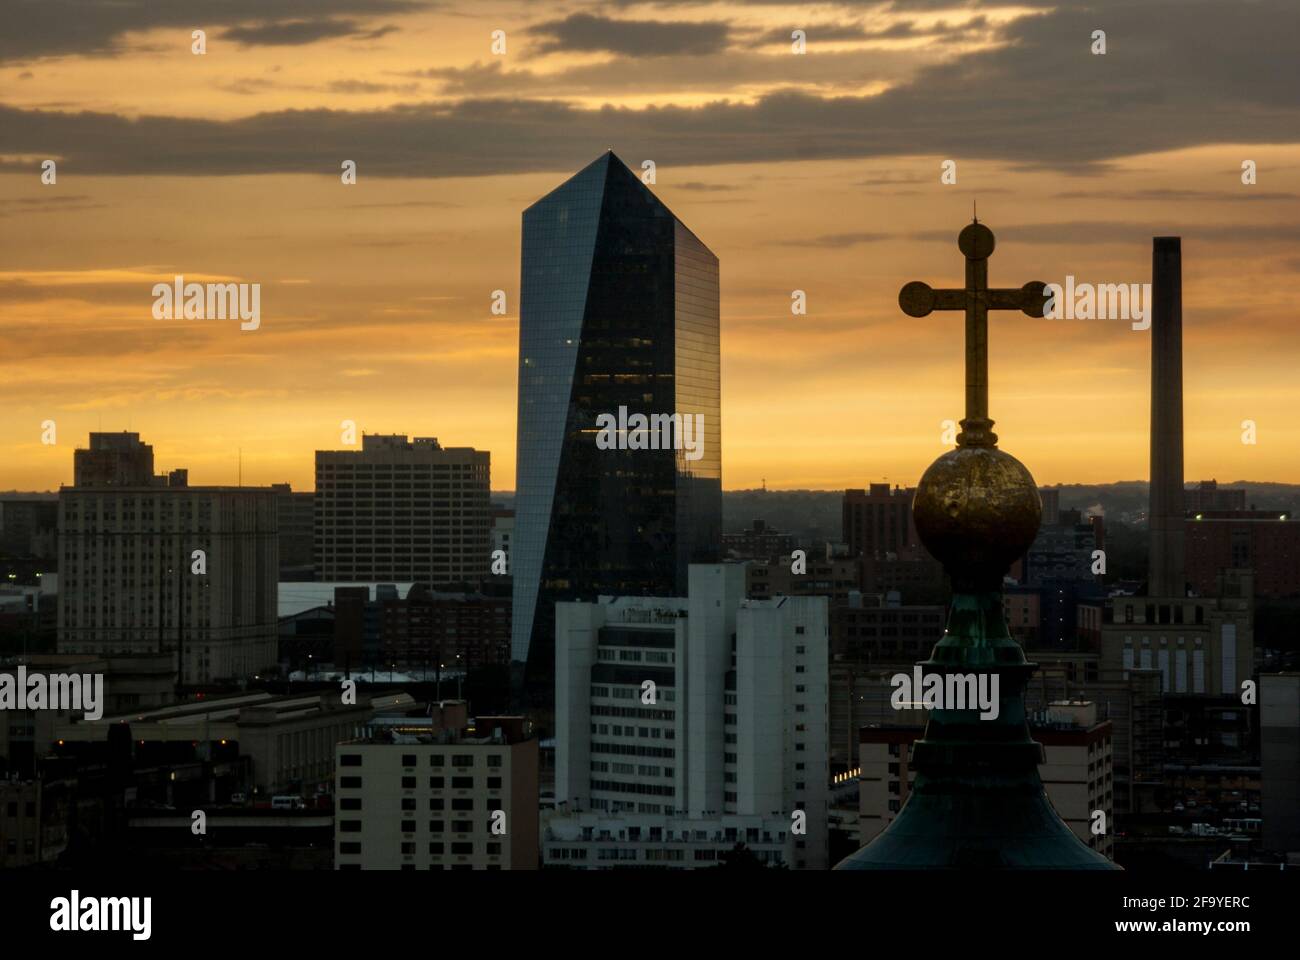 A high view of the cross of the Cathedral Basilica of Saints Peter and Paul, with the Cira Center beyond, at sunset in Philadelphia, USA. Stock Photo